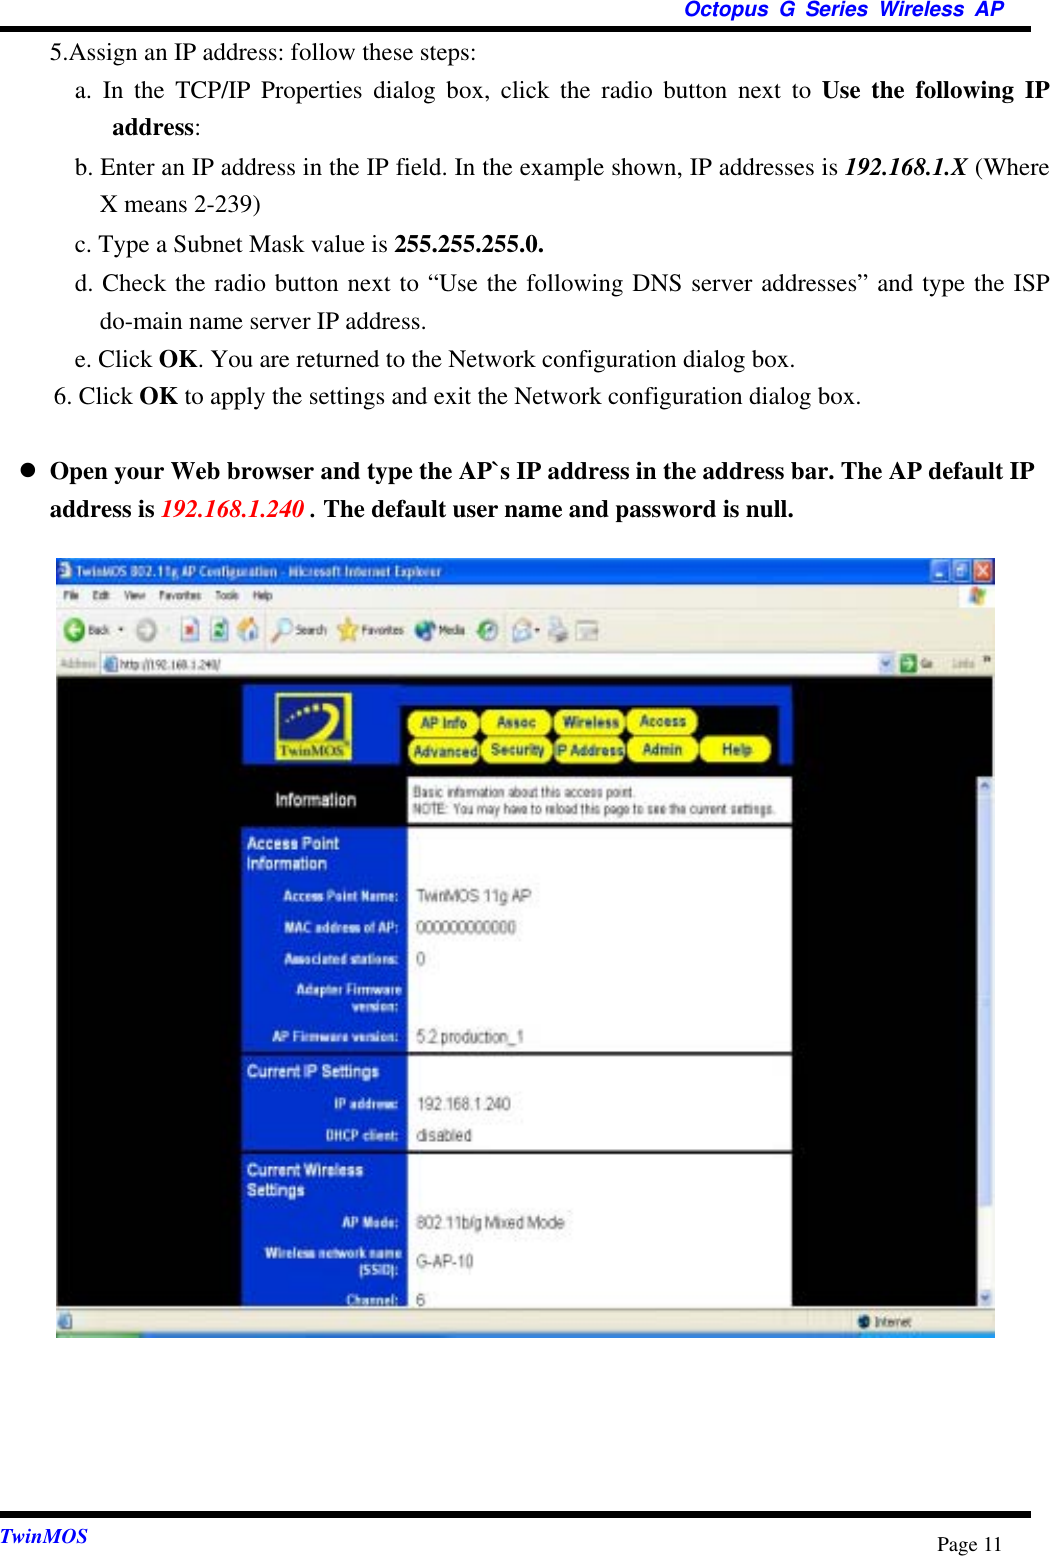  Octopus G Series Wireless AP  TwinMOS  Page 11  5.Assign an IP address: follow these steps:    a. In the TCP/IP Properties dialog box, click the radio button next to Use the following IP address:    b. Enter an IP address in the IP field. In the example shown, IP addresses is 192.168.1.X (Where X means 2-239)   c. Type a Subnet Mask value is 255.255.255.0.   d. Check the radio button next to “Use the following DNS server addresses” and type the ISP do-main name server IP address.         e. Click OK. You are returned to the Network configuration dialog box.    6. Click OK to apply the settings and exit the Network configuration dialog box.     Open your Web browser and type the AP`s IP address in the address bar. The AP default IP address is 192.168.1.240 . The default user name and password is null.                                